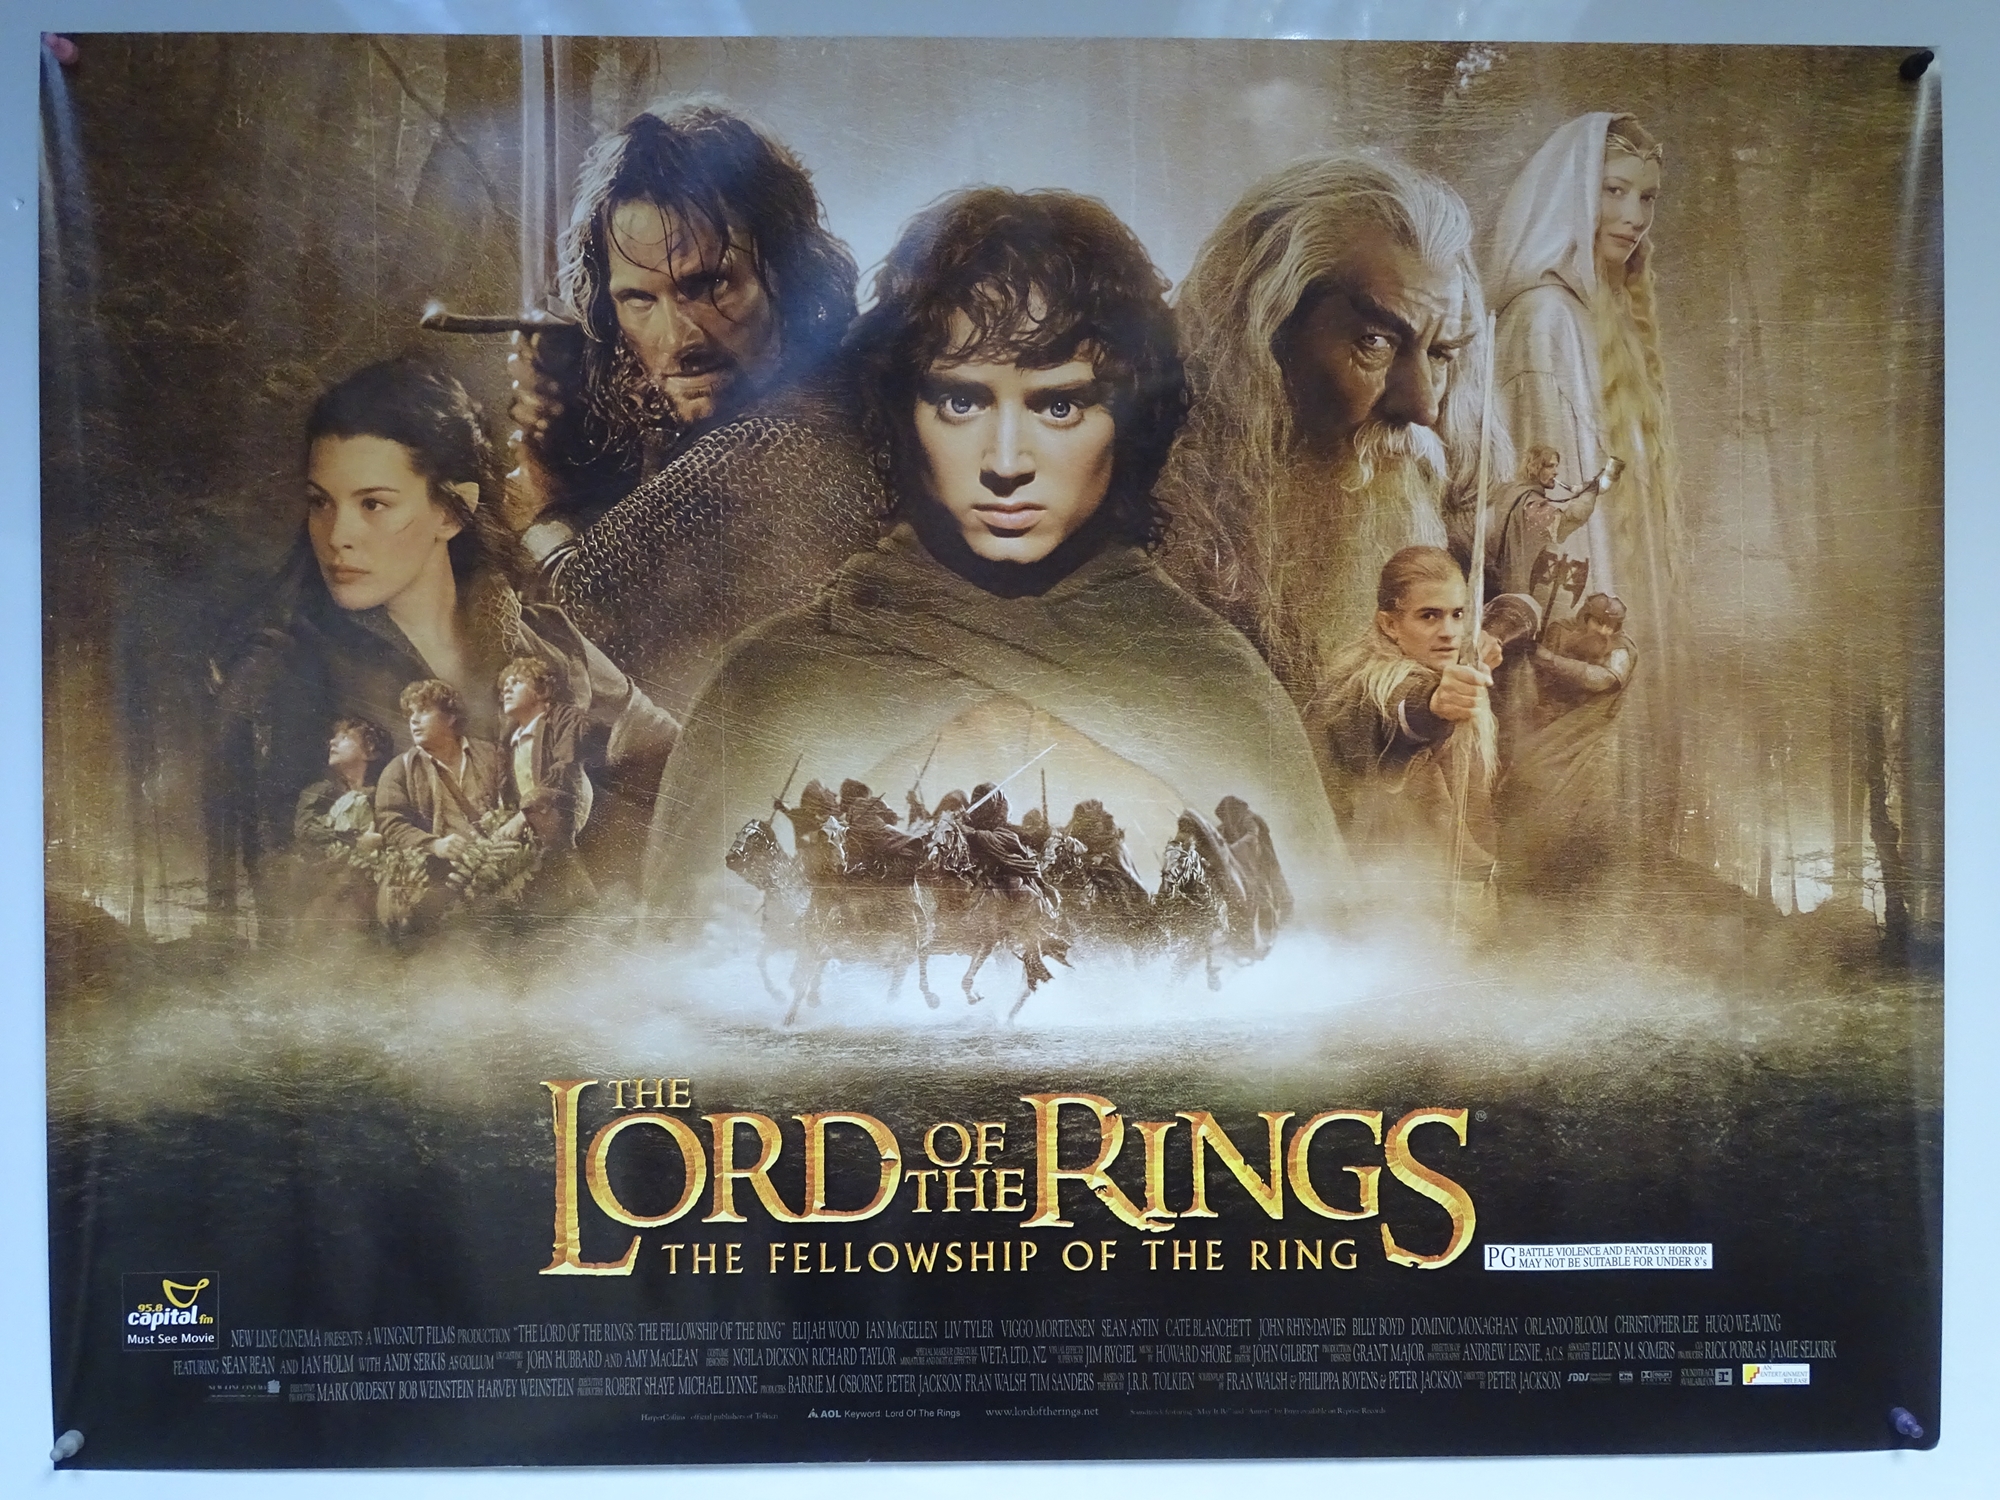 THE LORD OF THE RINGS 'THE FELLOWSHIP OF THE RING' (2001) - ACTION / FANTASY - IAN MCKELLAN / ELIJAH